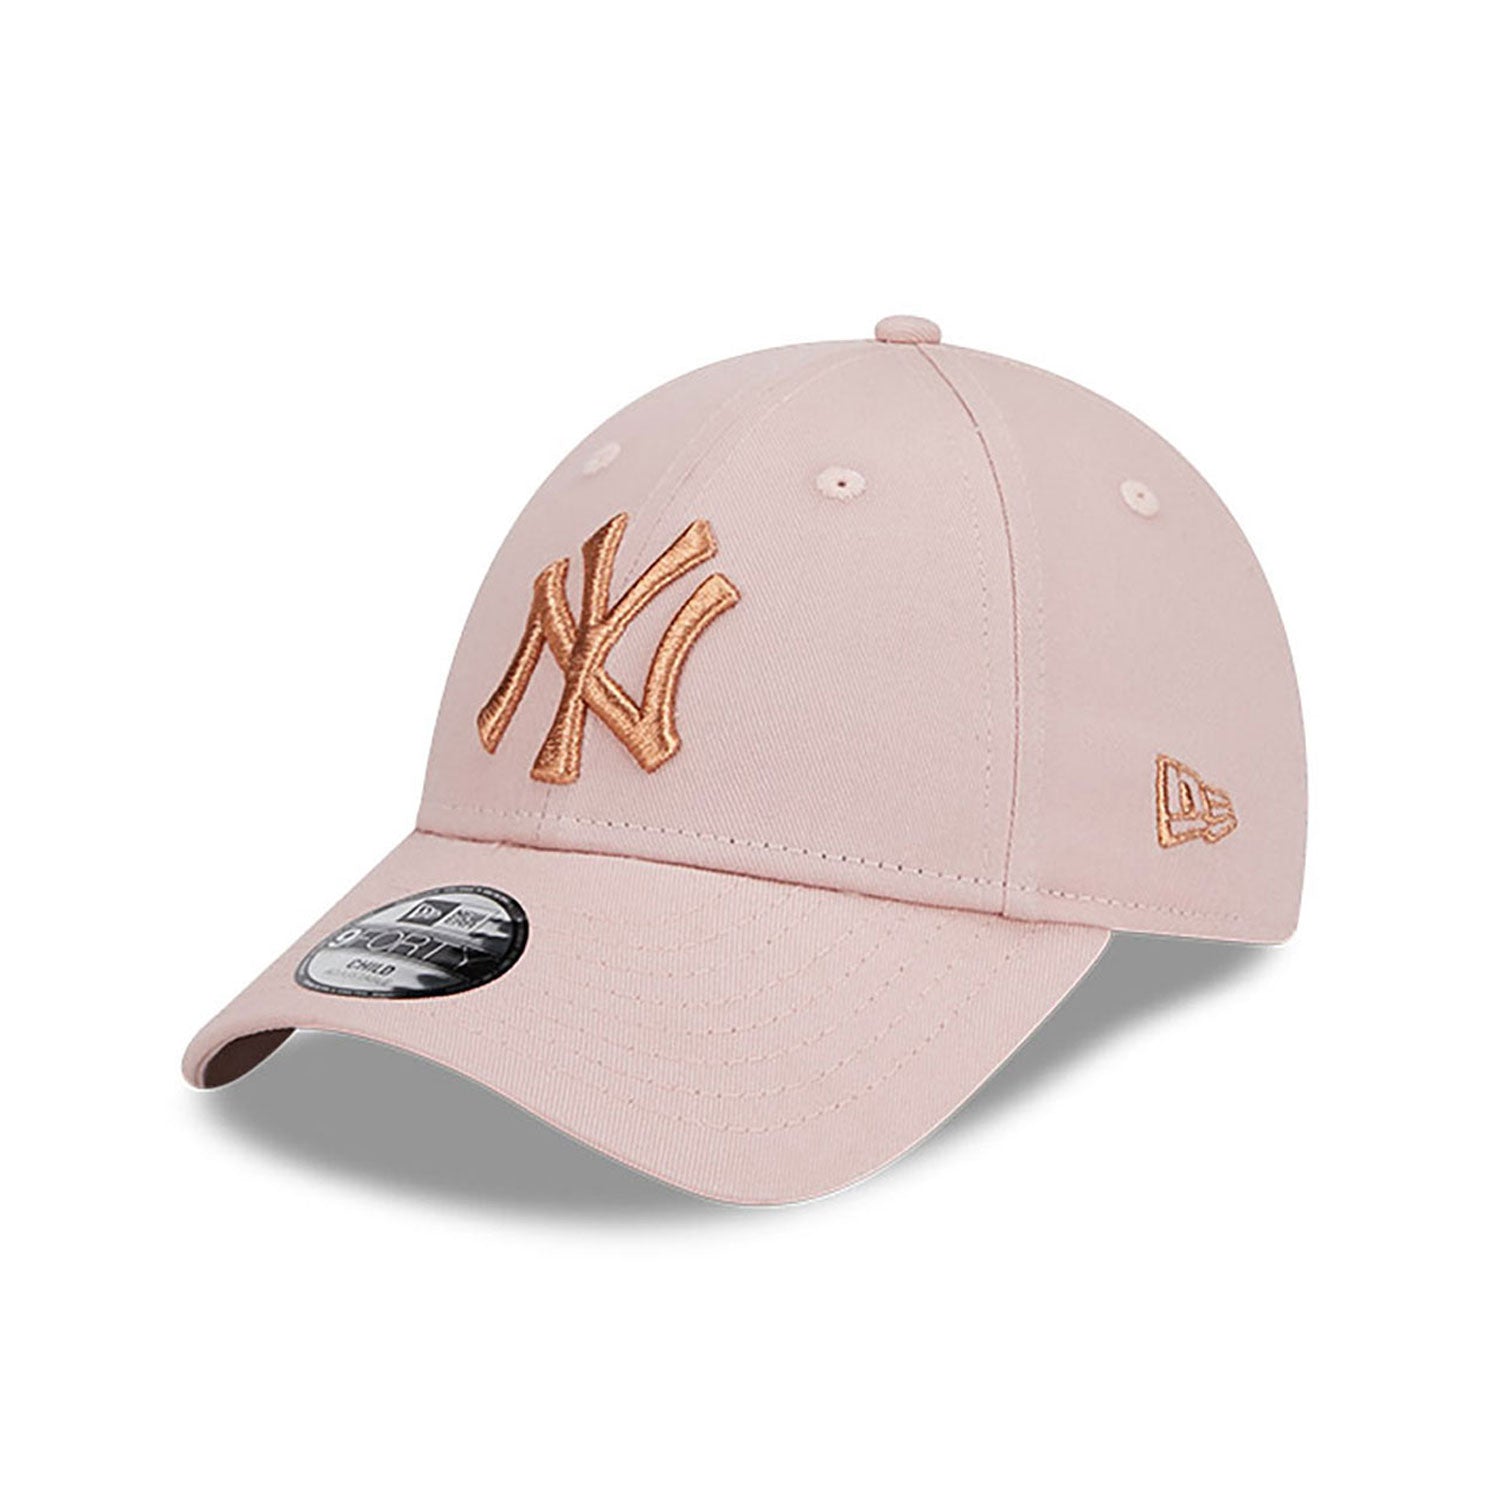 New Era kids 9Forty "Pink/Metal" NY Yankees (NEW Collection)